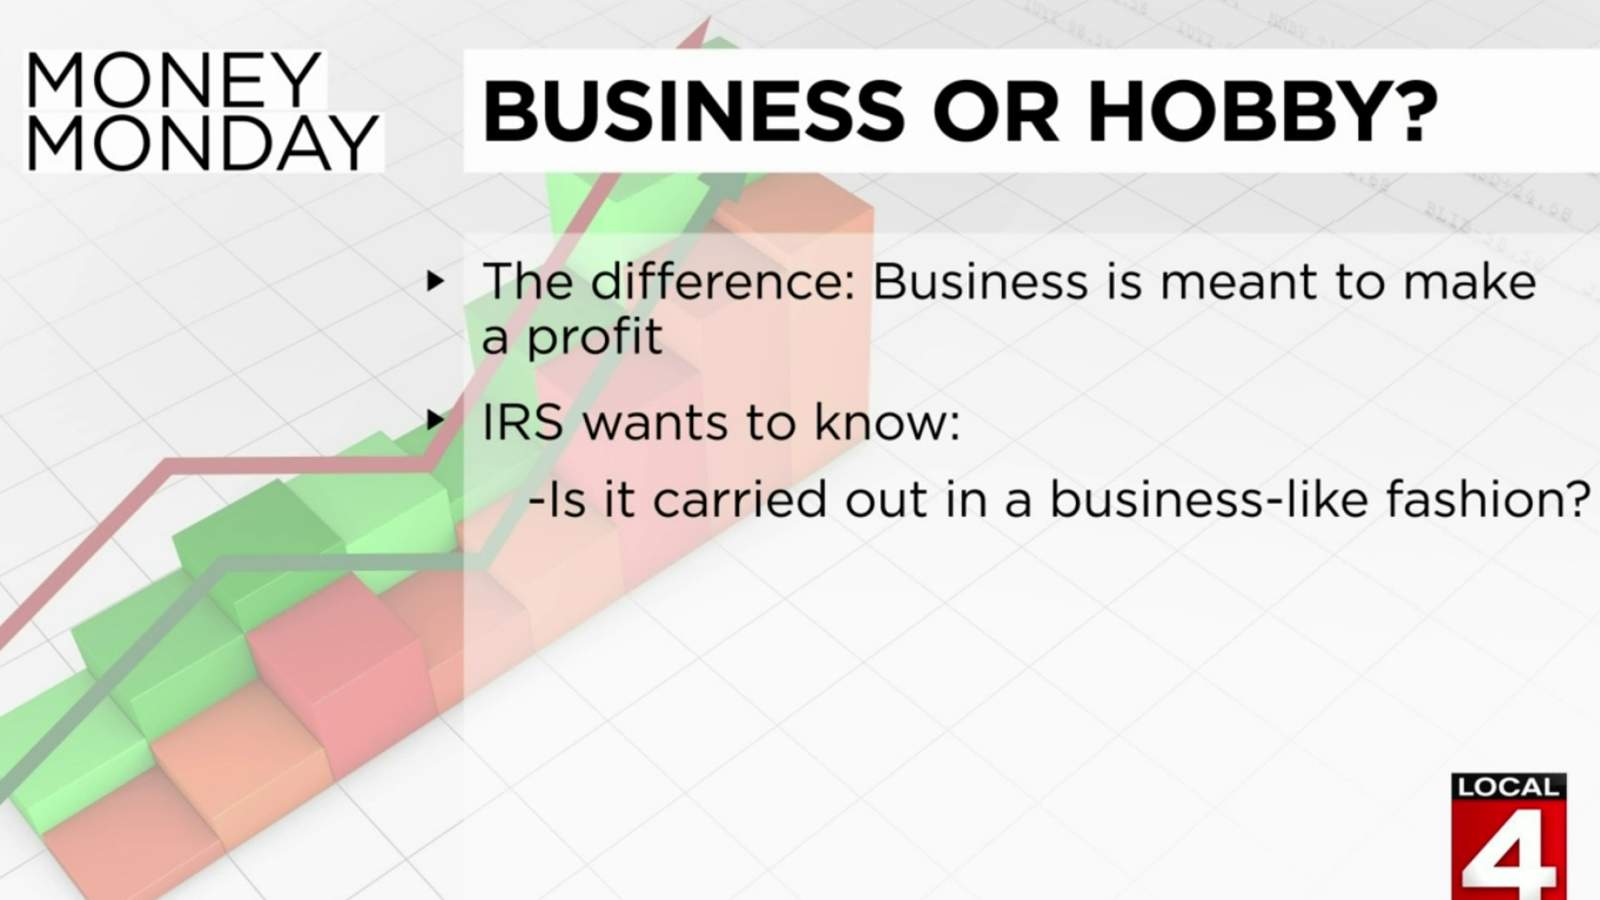 Money Monday financial tips: The difference between a business and hobby